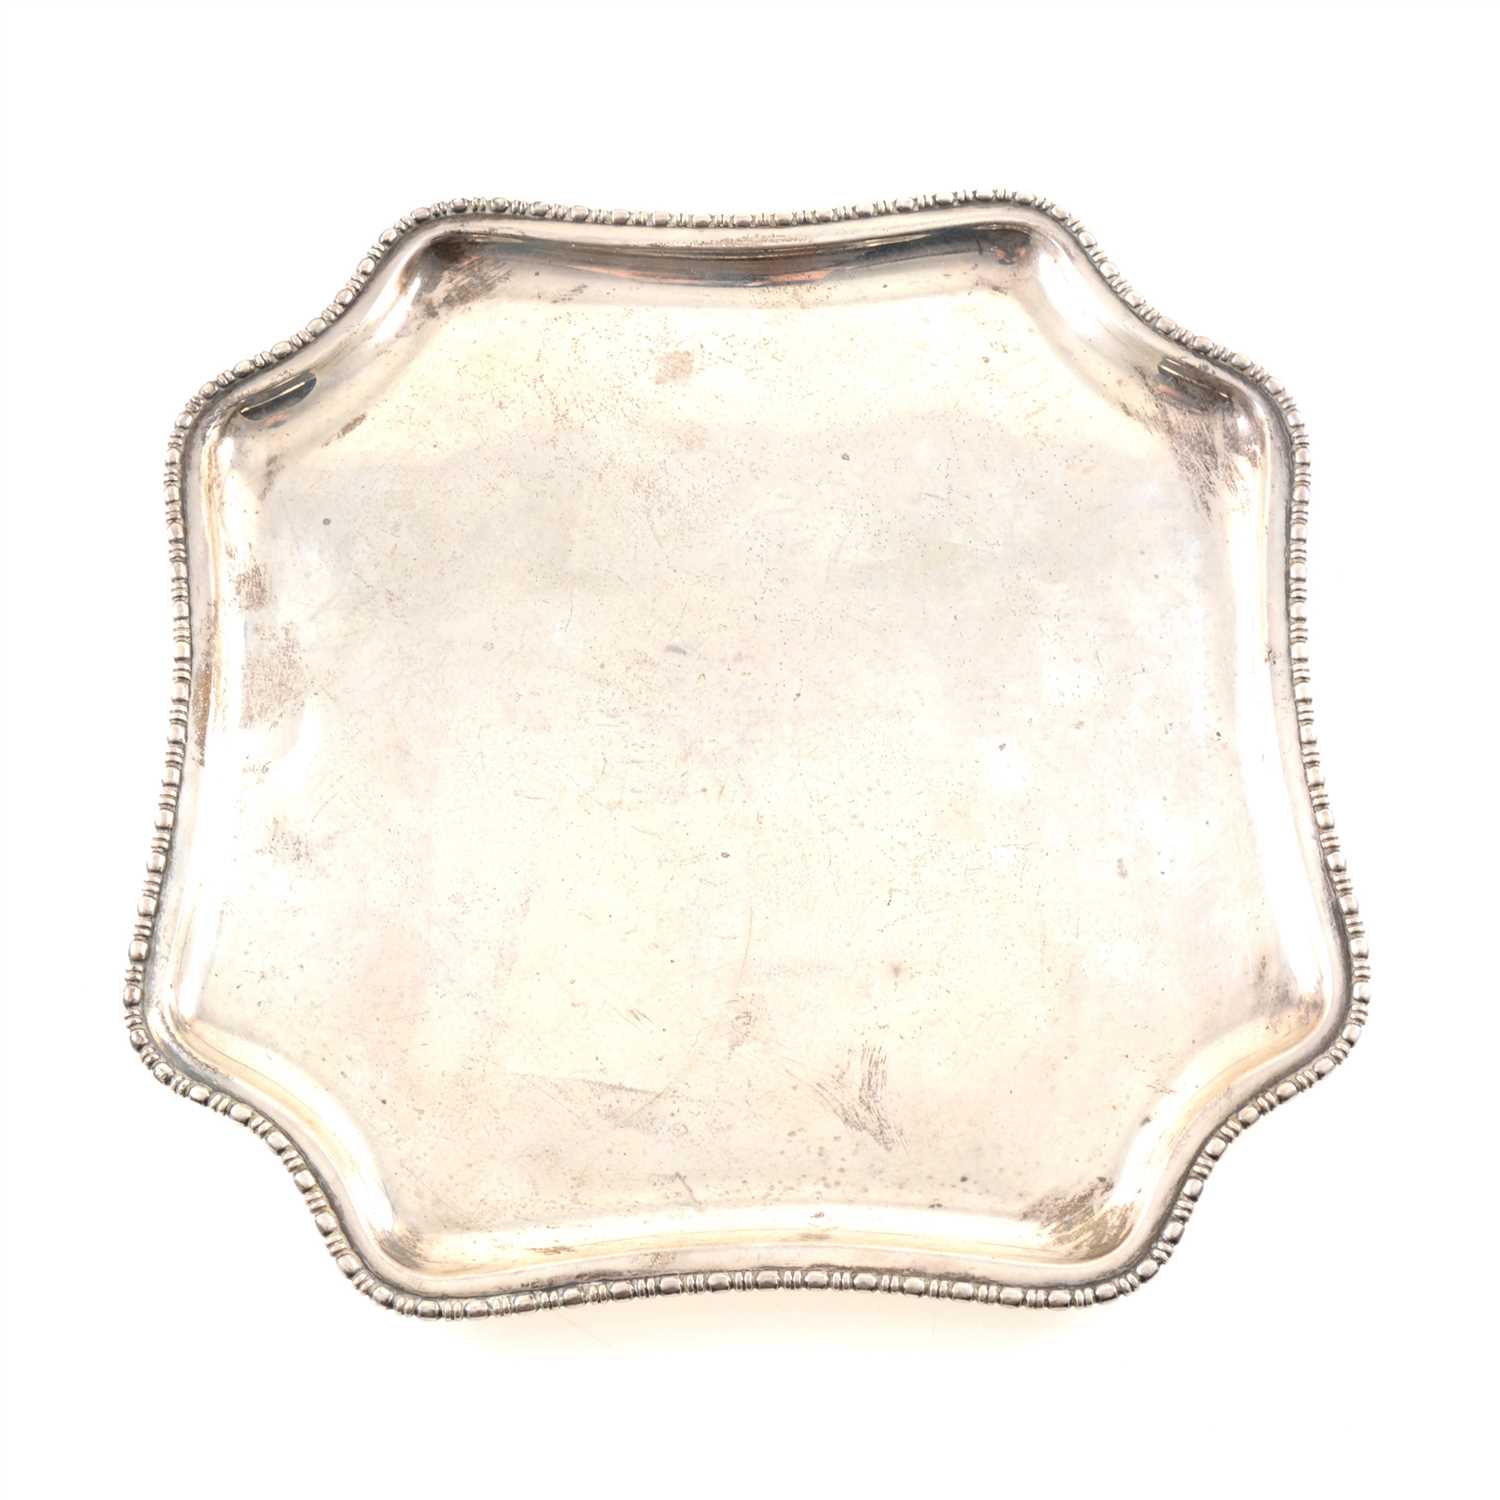 Lot 246 - A silver salver by Atkin Brothers, square shape with curved corners and beaded edge, on four round feet, Sheffield 1927, 24.5cm diameter, weight approx. 16.8oz.